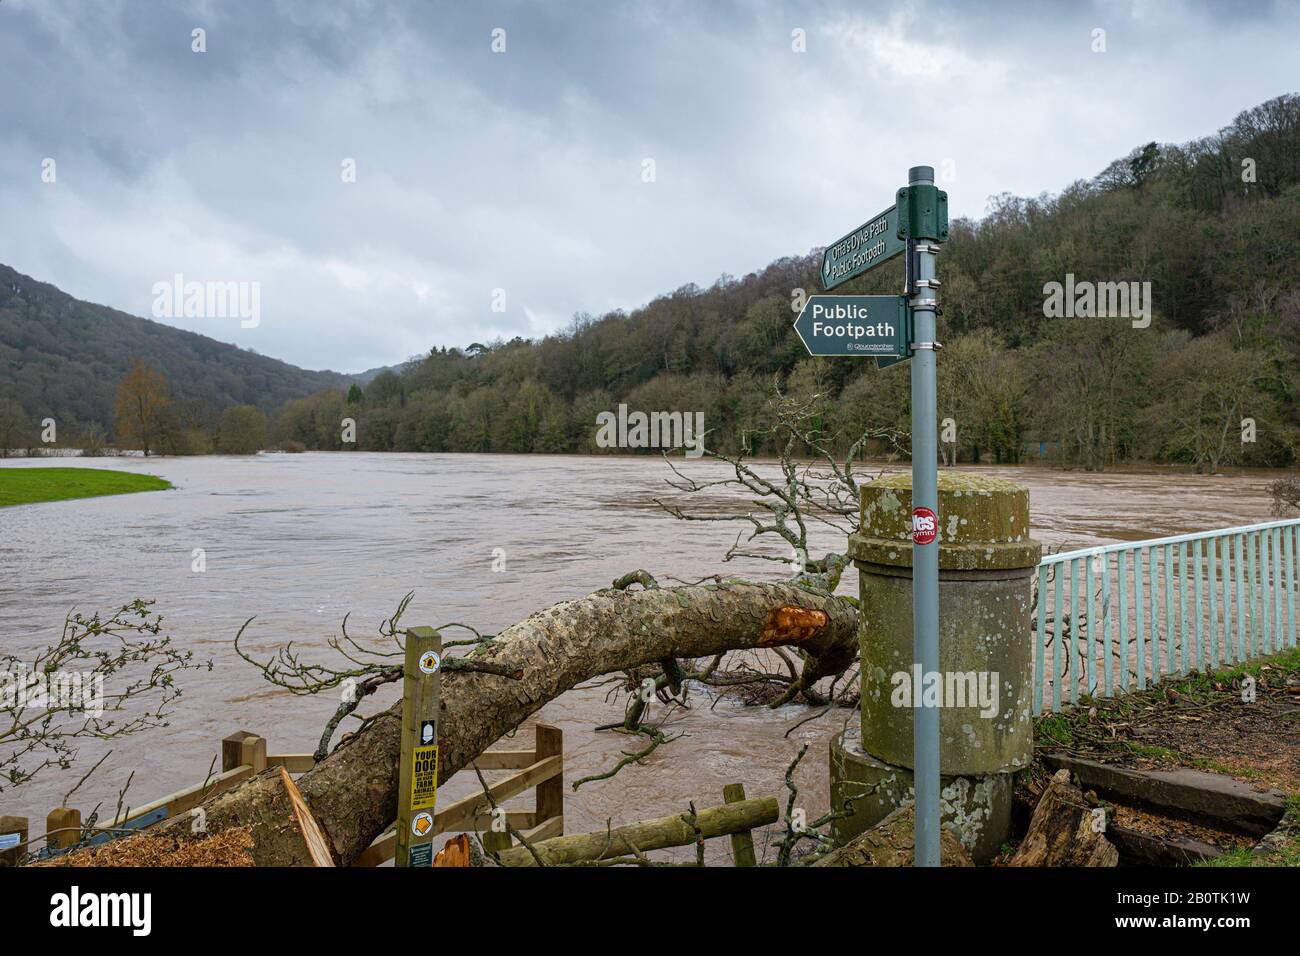 Wind fallen tree and the River Wye in spate at Bigsweir on the Monmouthshire - Gloucestershire border. February 2020. Stock Photo